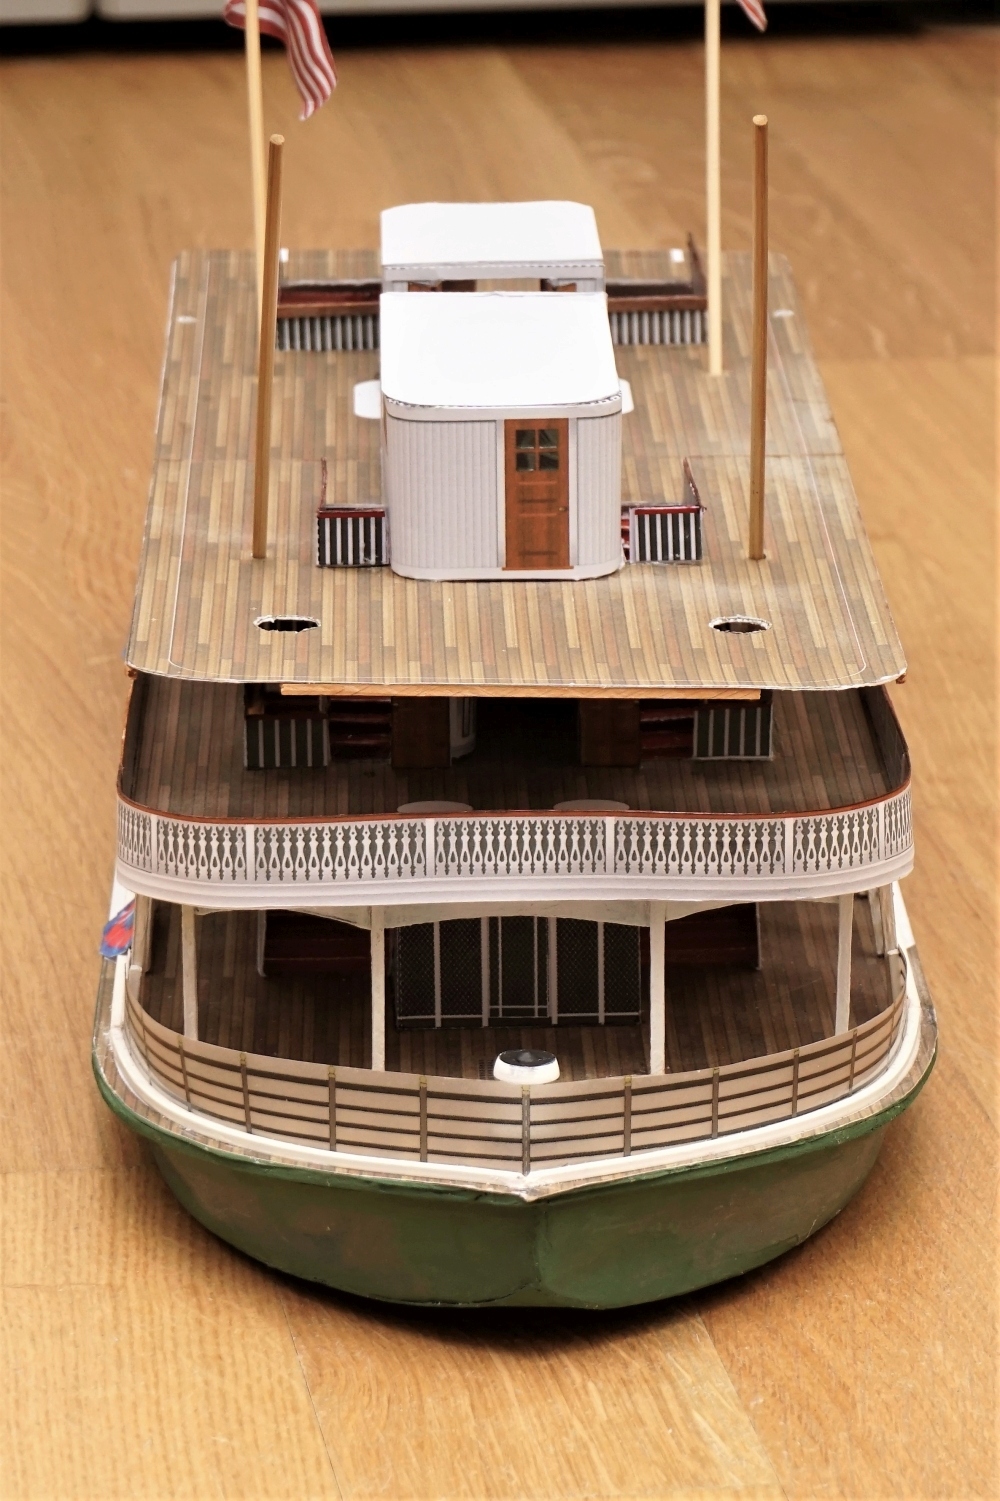 Mississippi Riverboat "Mark Twain" / 1:50, Pappe, Holz u.a.  - Seite 2 Dsc05240